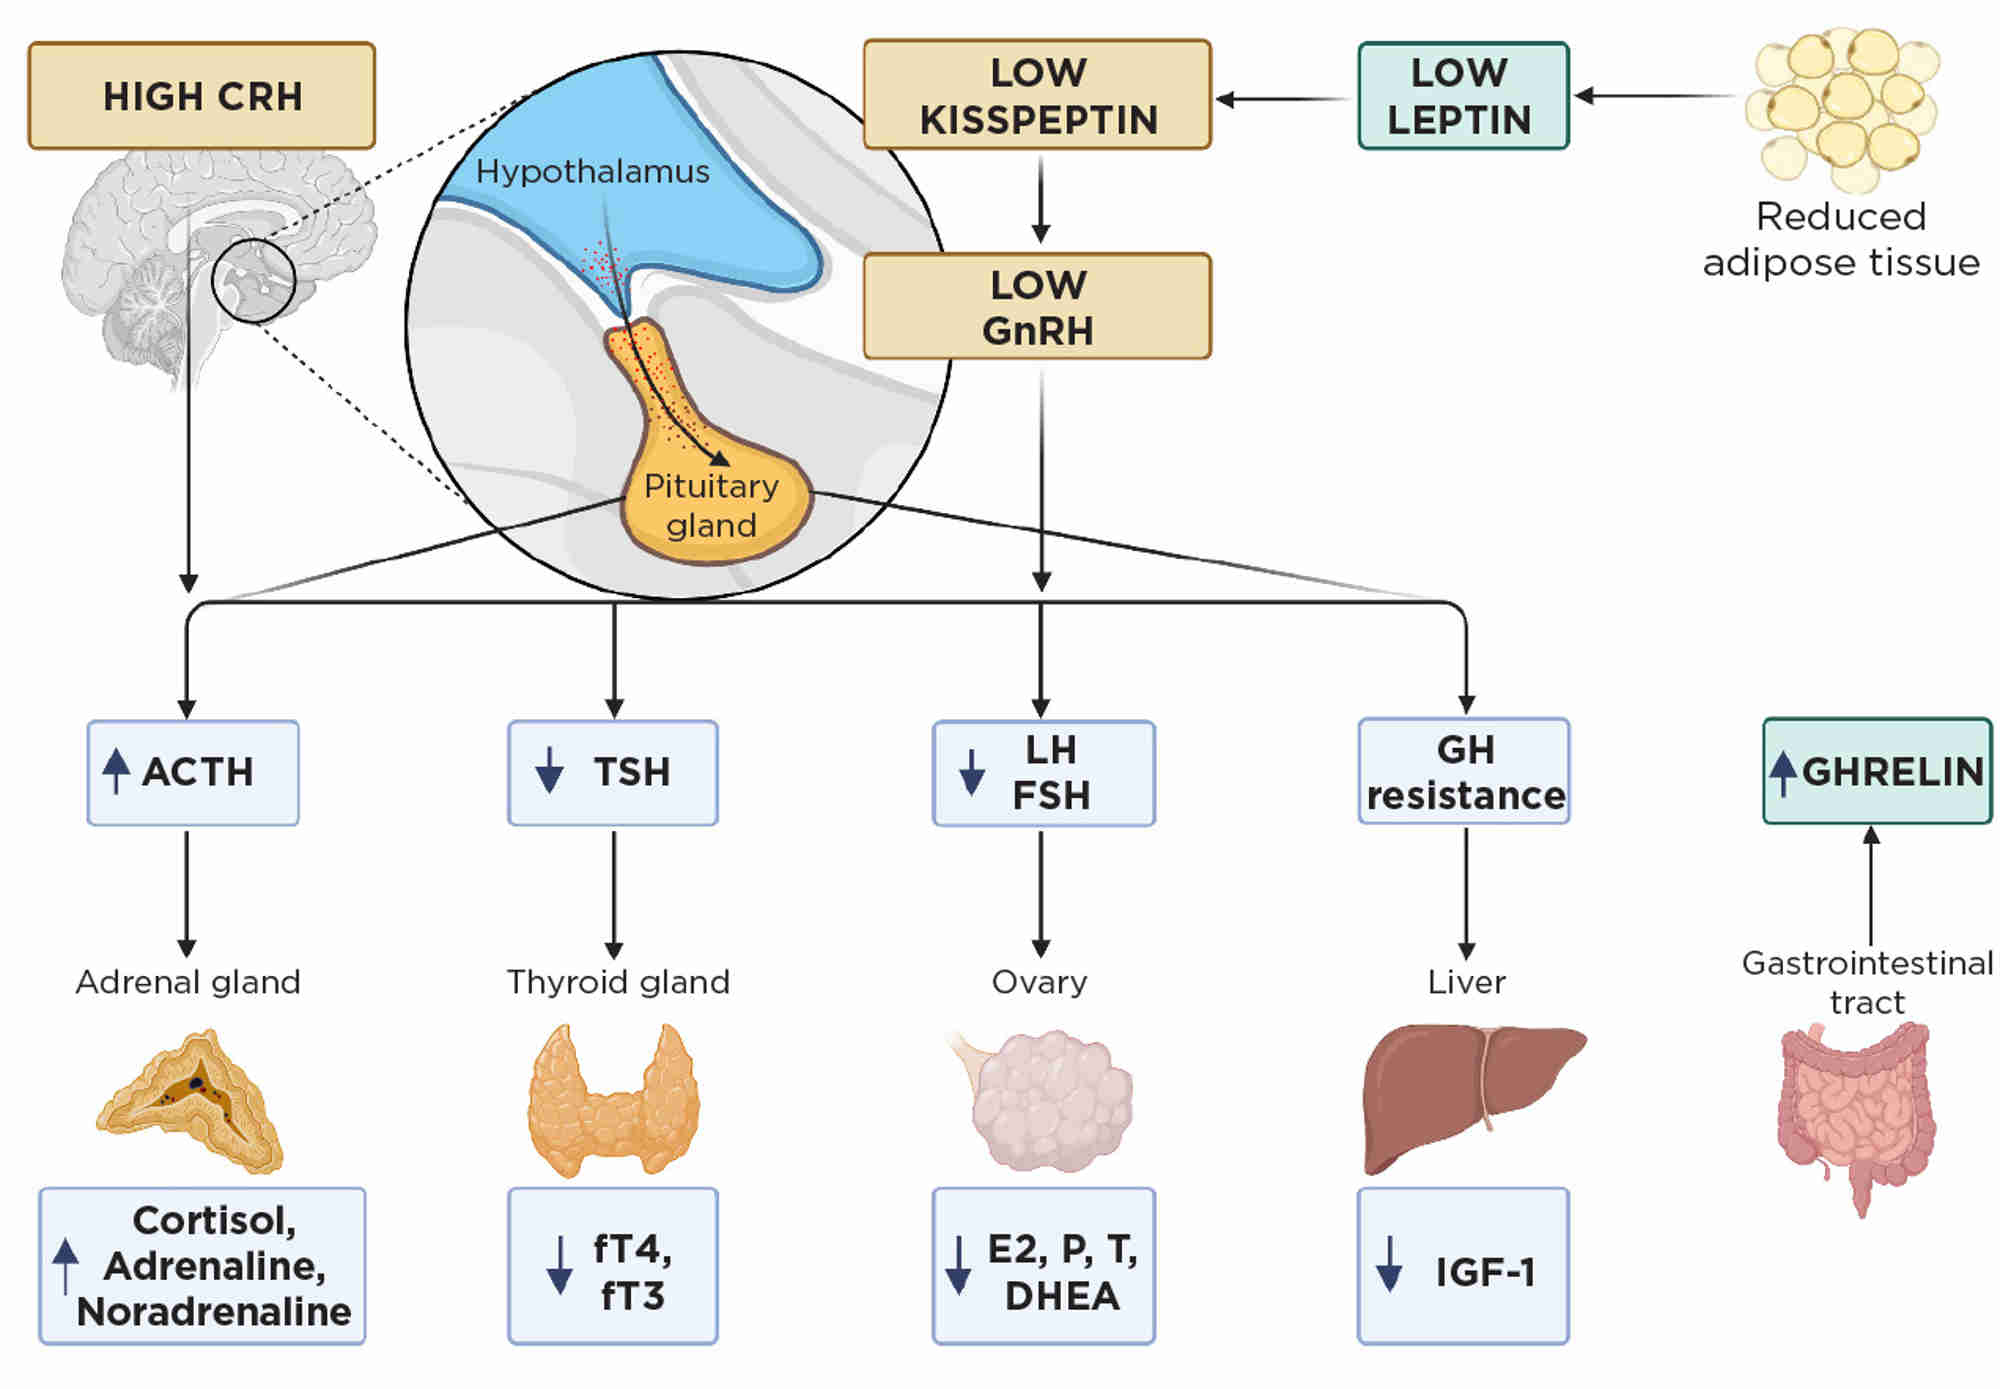 Figure 1. Endocrine imbalance in FHA usually occurs secondary to calorie restriction with low weight in anorexia, excess exercise or high stress. CRH, corticotrophin-releasing hormone; DHEA; dehydroepiandrosterone; E2, oestradiol; FSH, follicle-stimulating hormone; fT3, free tri-iodothyronine; fT4, free thyroxine; GH, growth hormone; GnRH, gonadotrophin-releasing hormone; LH, luteinising hormone; P, progesterone; T, testosterone; TSH, thyrotrophin. Created with BioRender